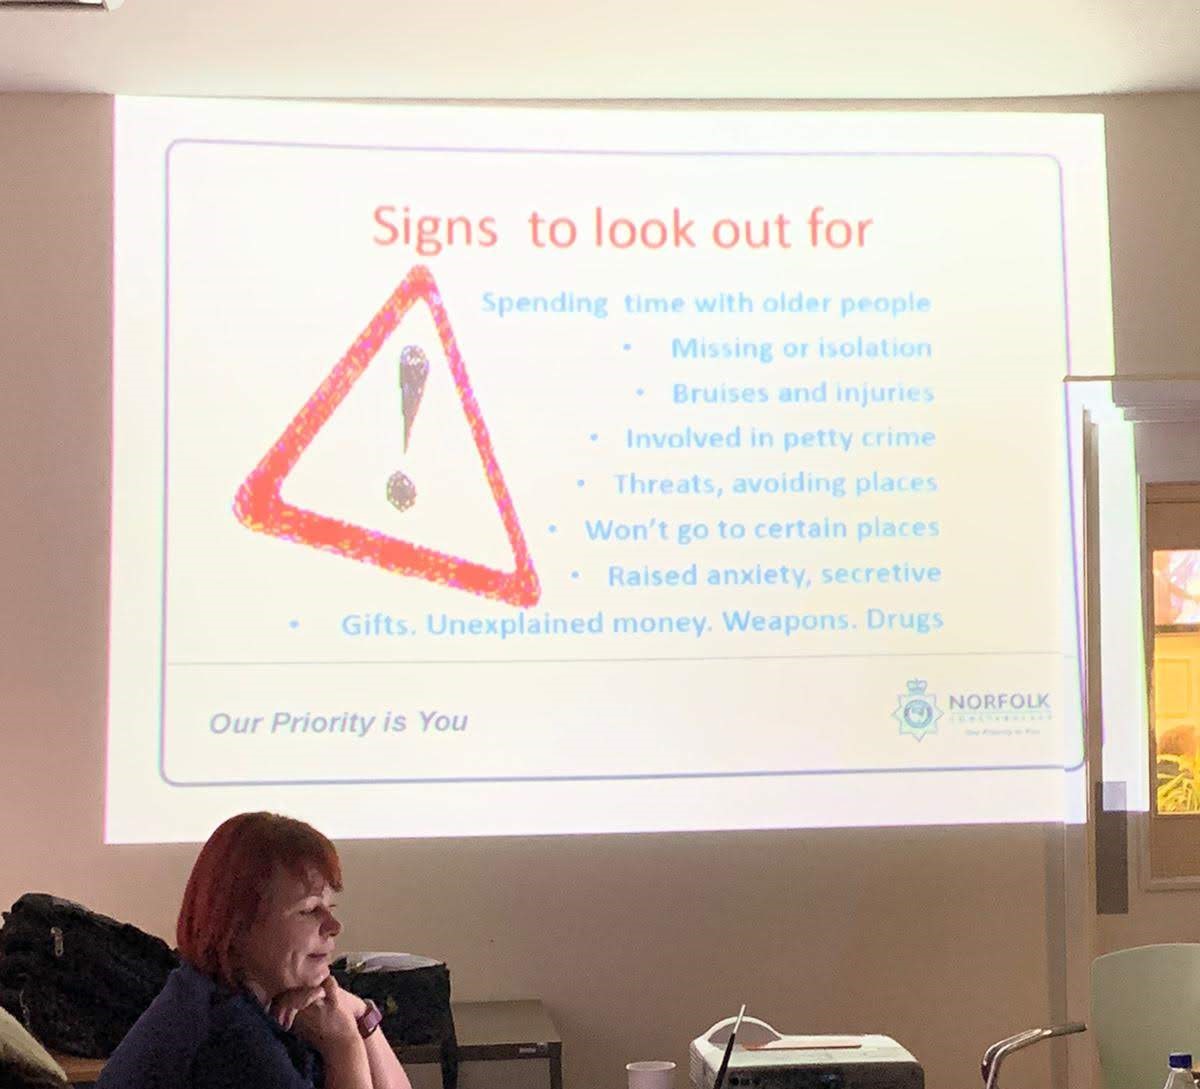 Great to have Tory from @SaferSchoolsNfk in yesterday, talking to our students about County Lines.

Tory discussed the signs to look out for, potential consequences of getting involved, as well who to contact if you have concerns.

#countylines #keepingyoungpeoplesafe